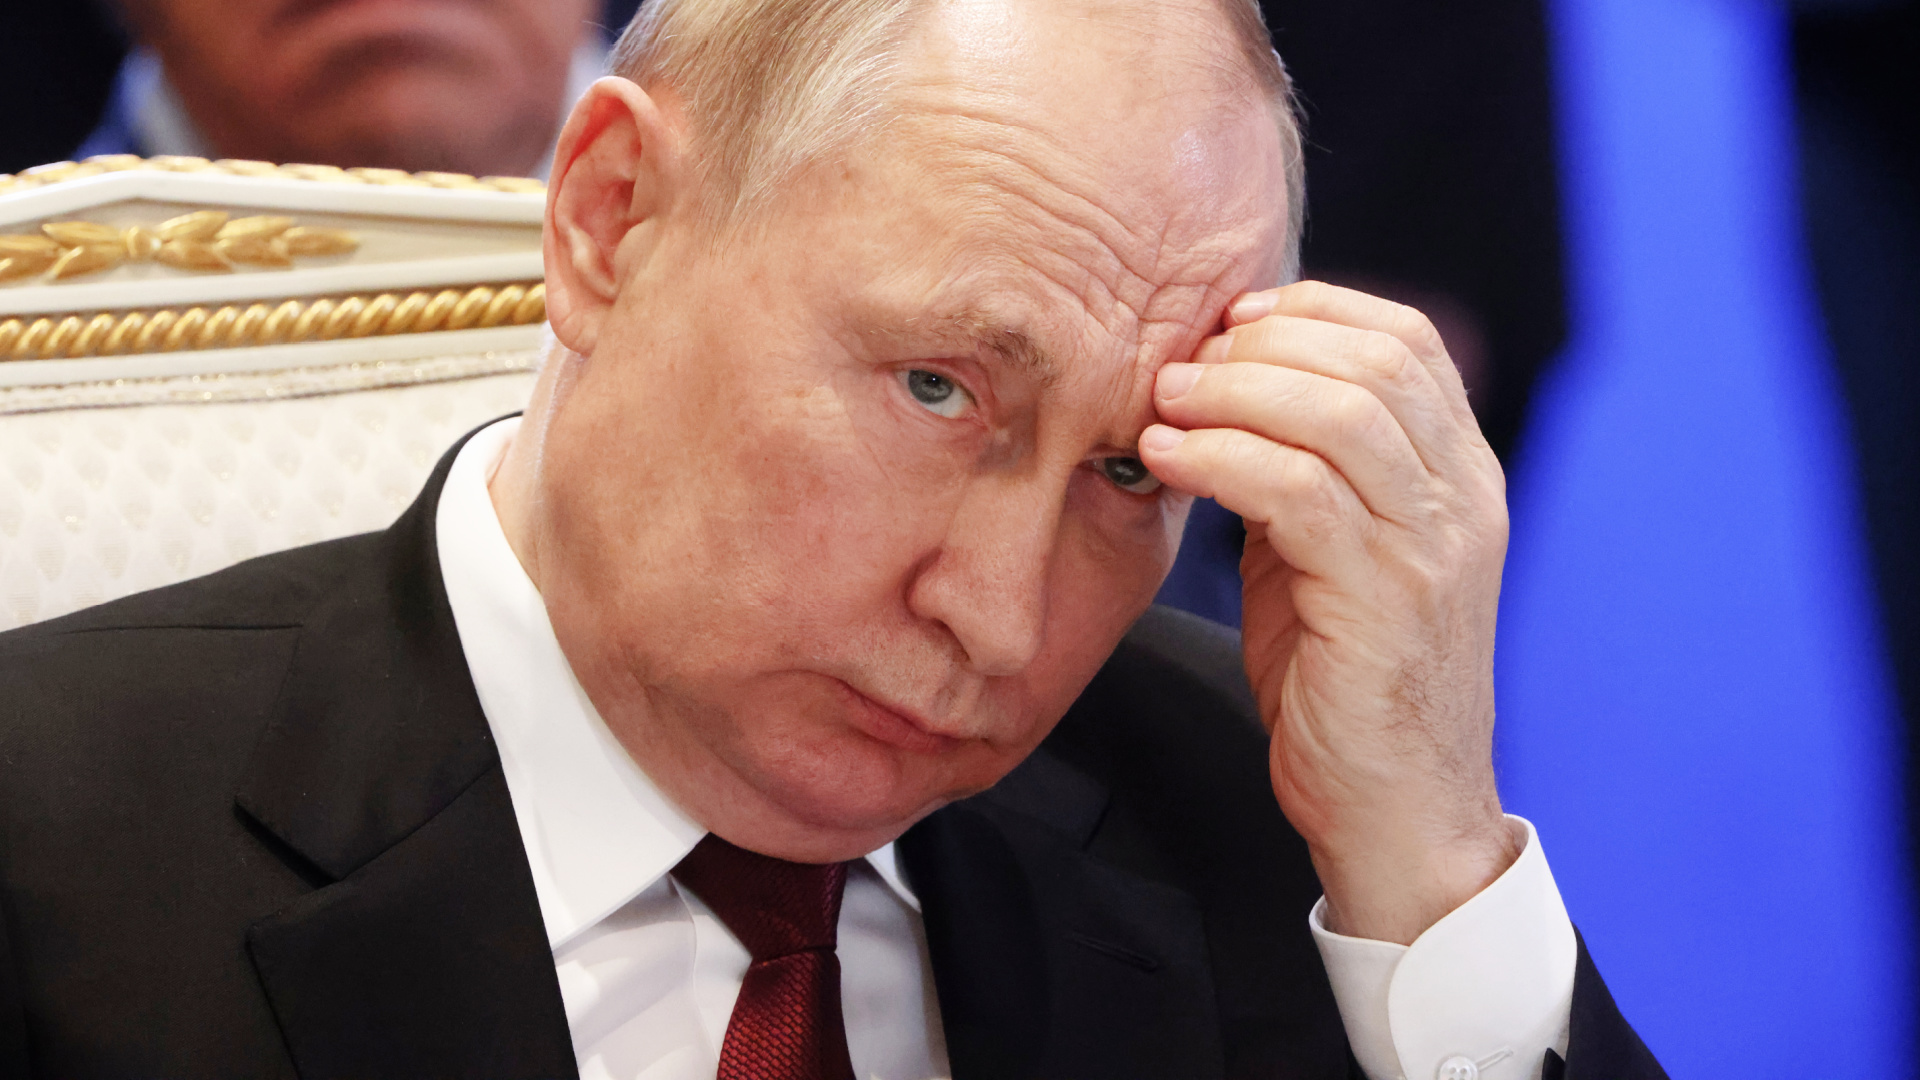 Putin’s ability to launch an effective counterattack is fading